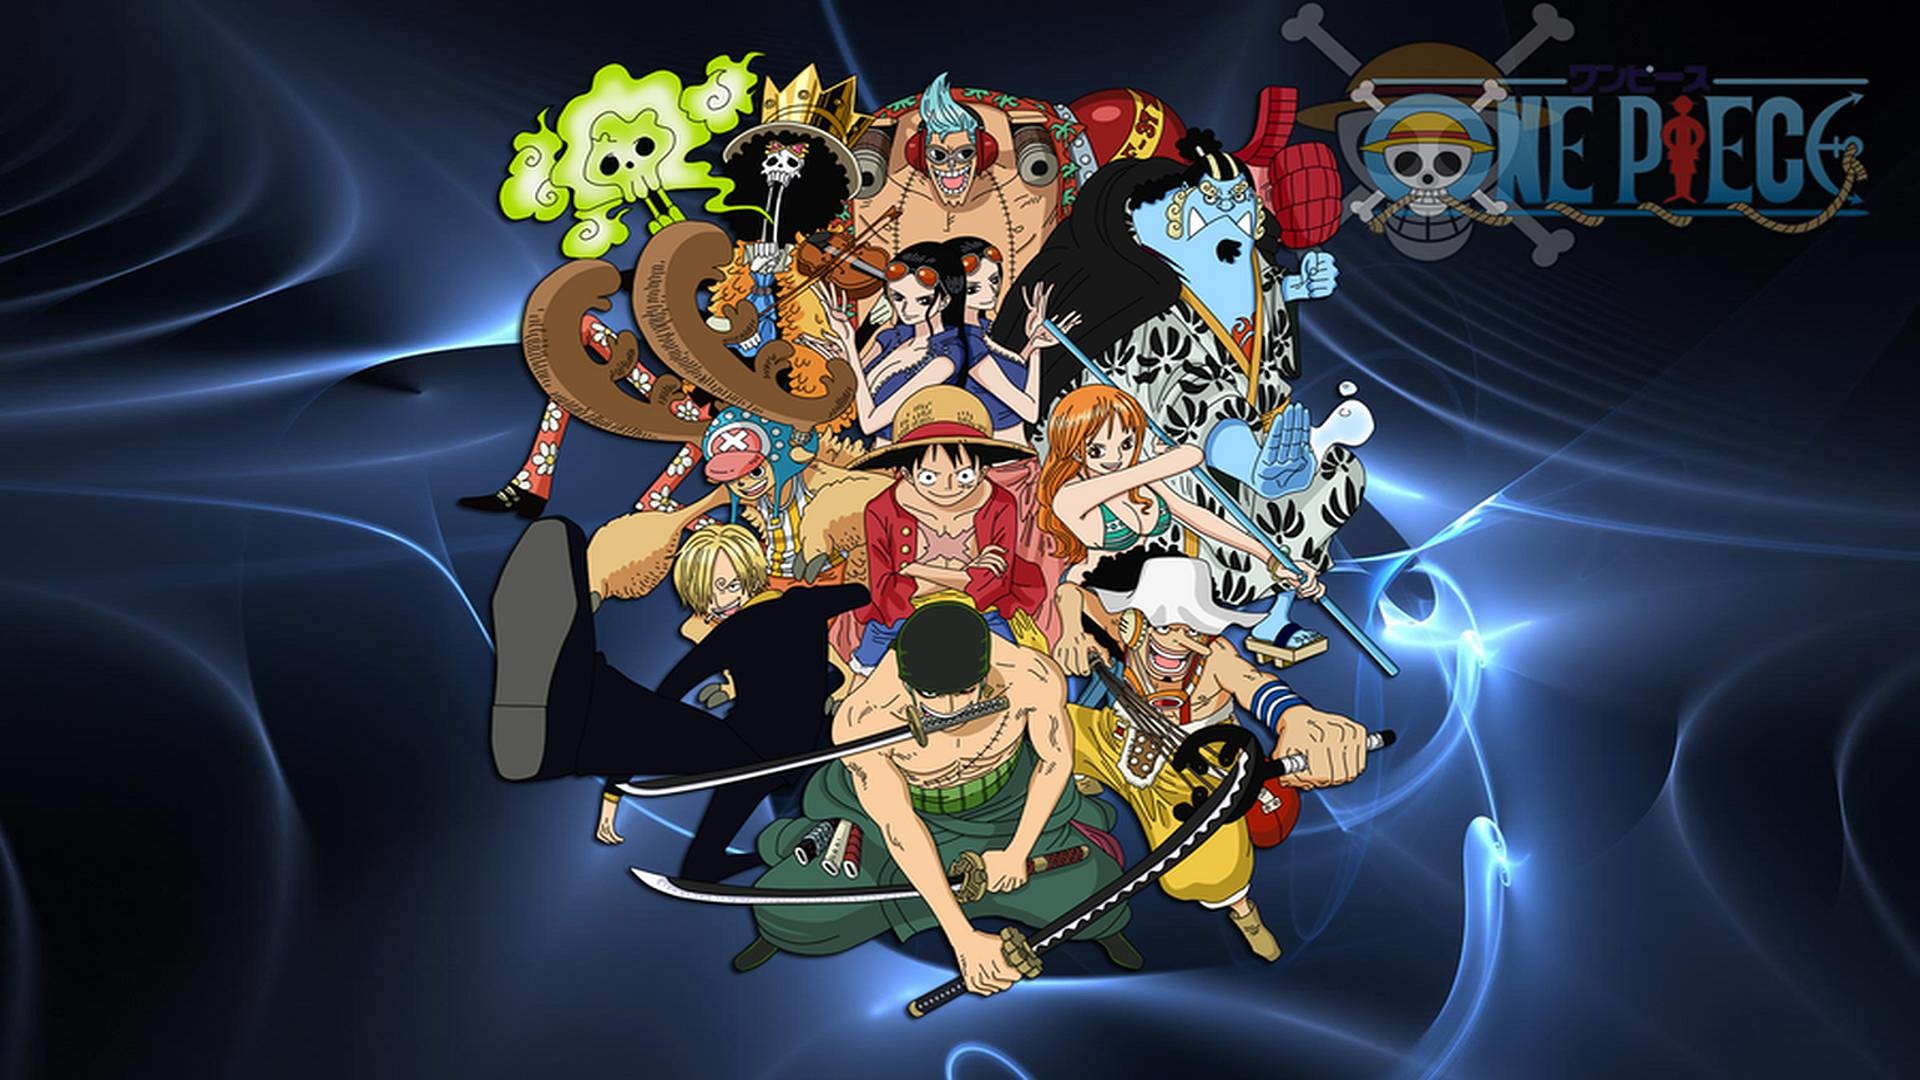 1920x1080 One Piece Luffy And Crew Background For Computer | Cartoons Images